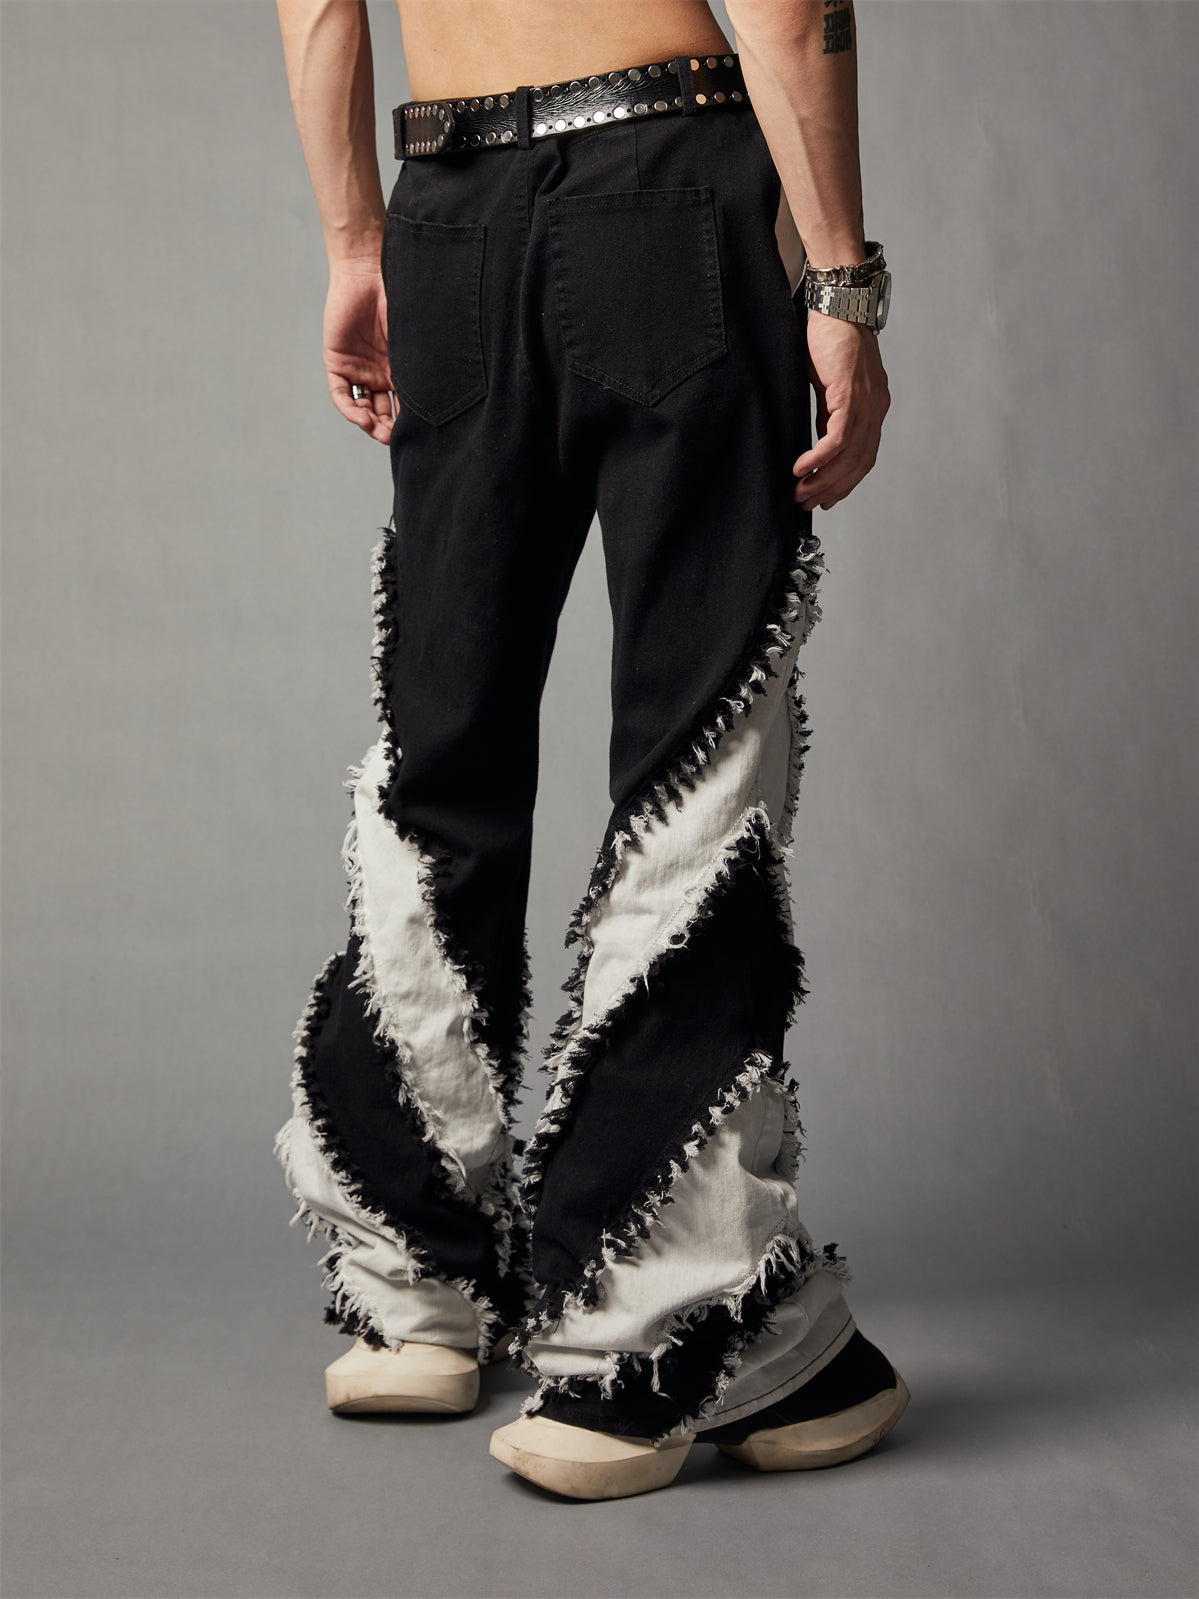 【23s August.】Black And White Paneled Frayed Jeans